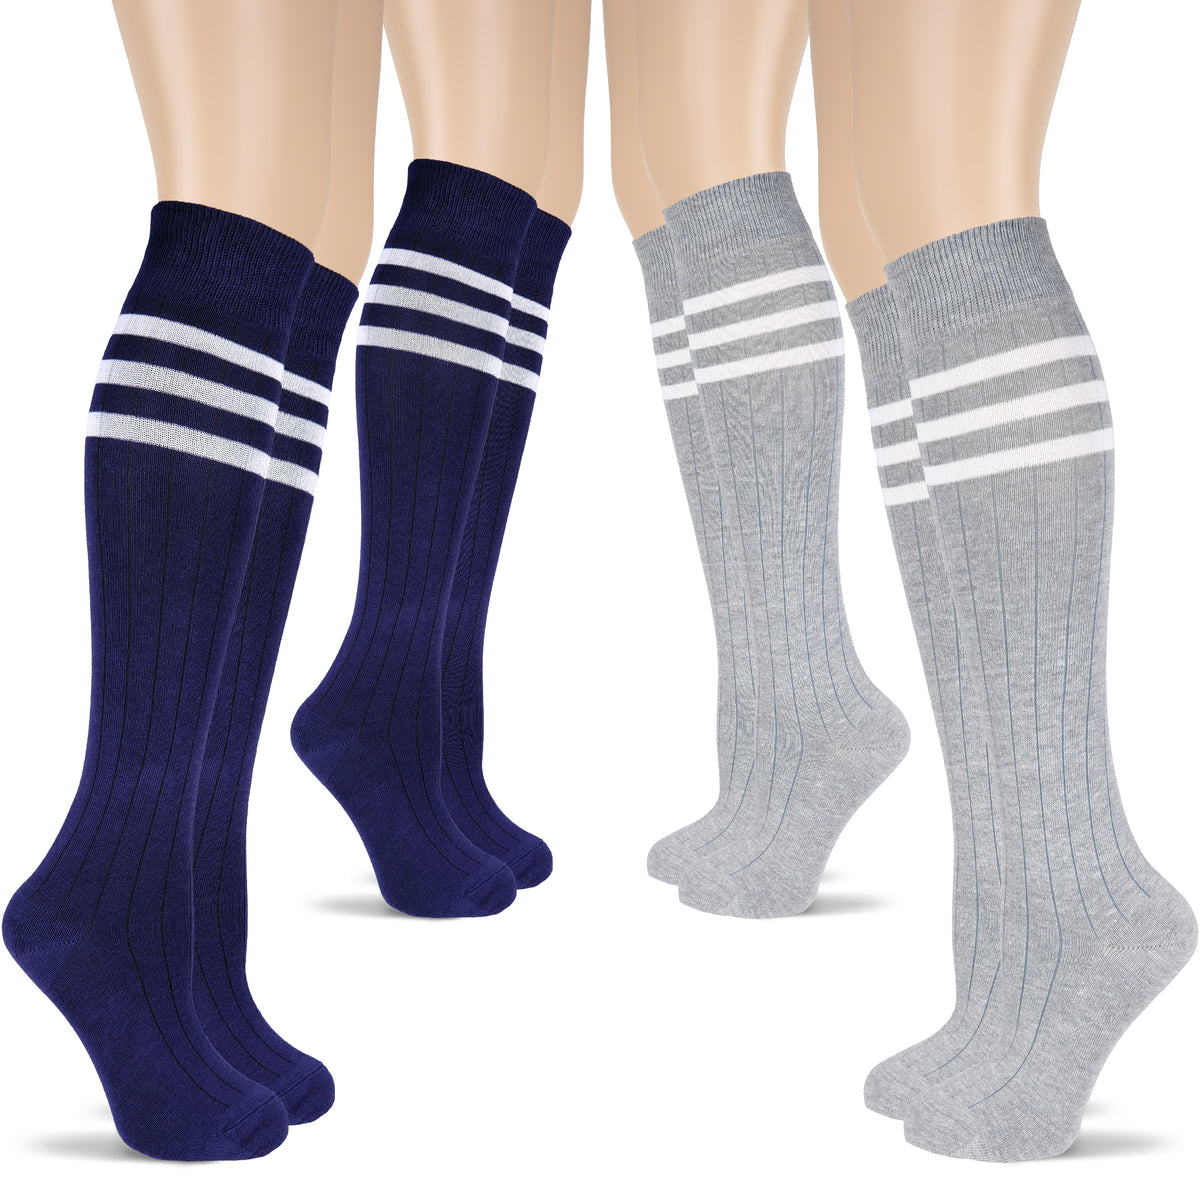 Blue and white stripes adorn these Women's Striped Cotton Dress Knee-High Socks, of which four pairs are shown in the image.